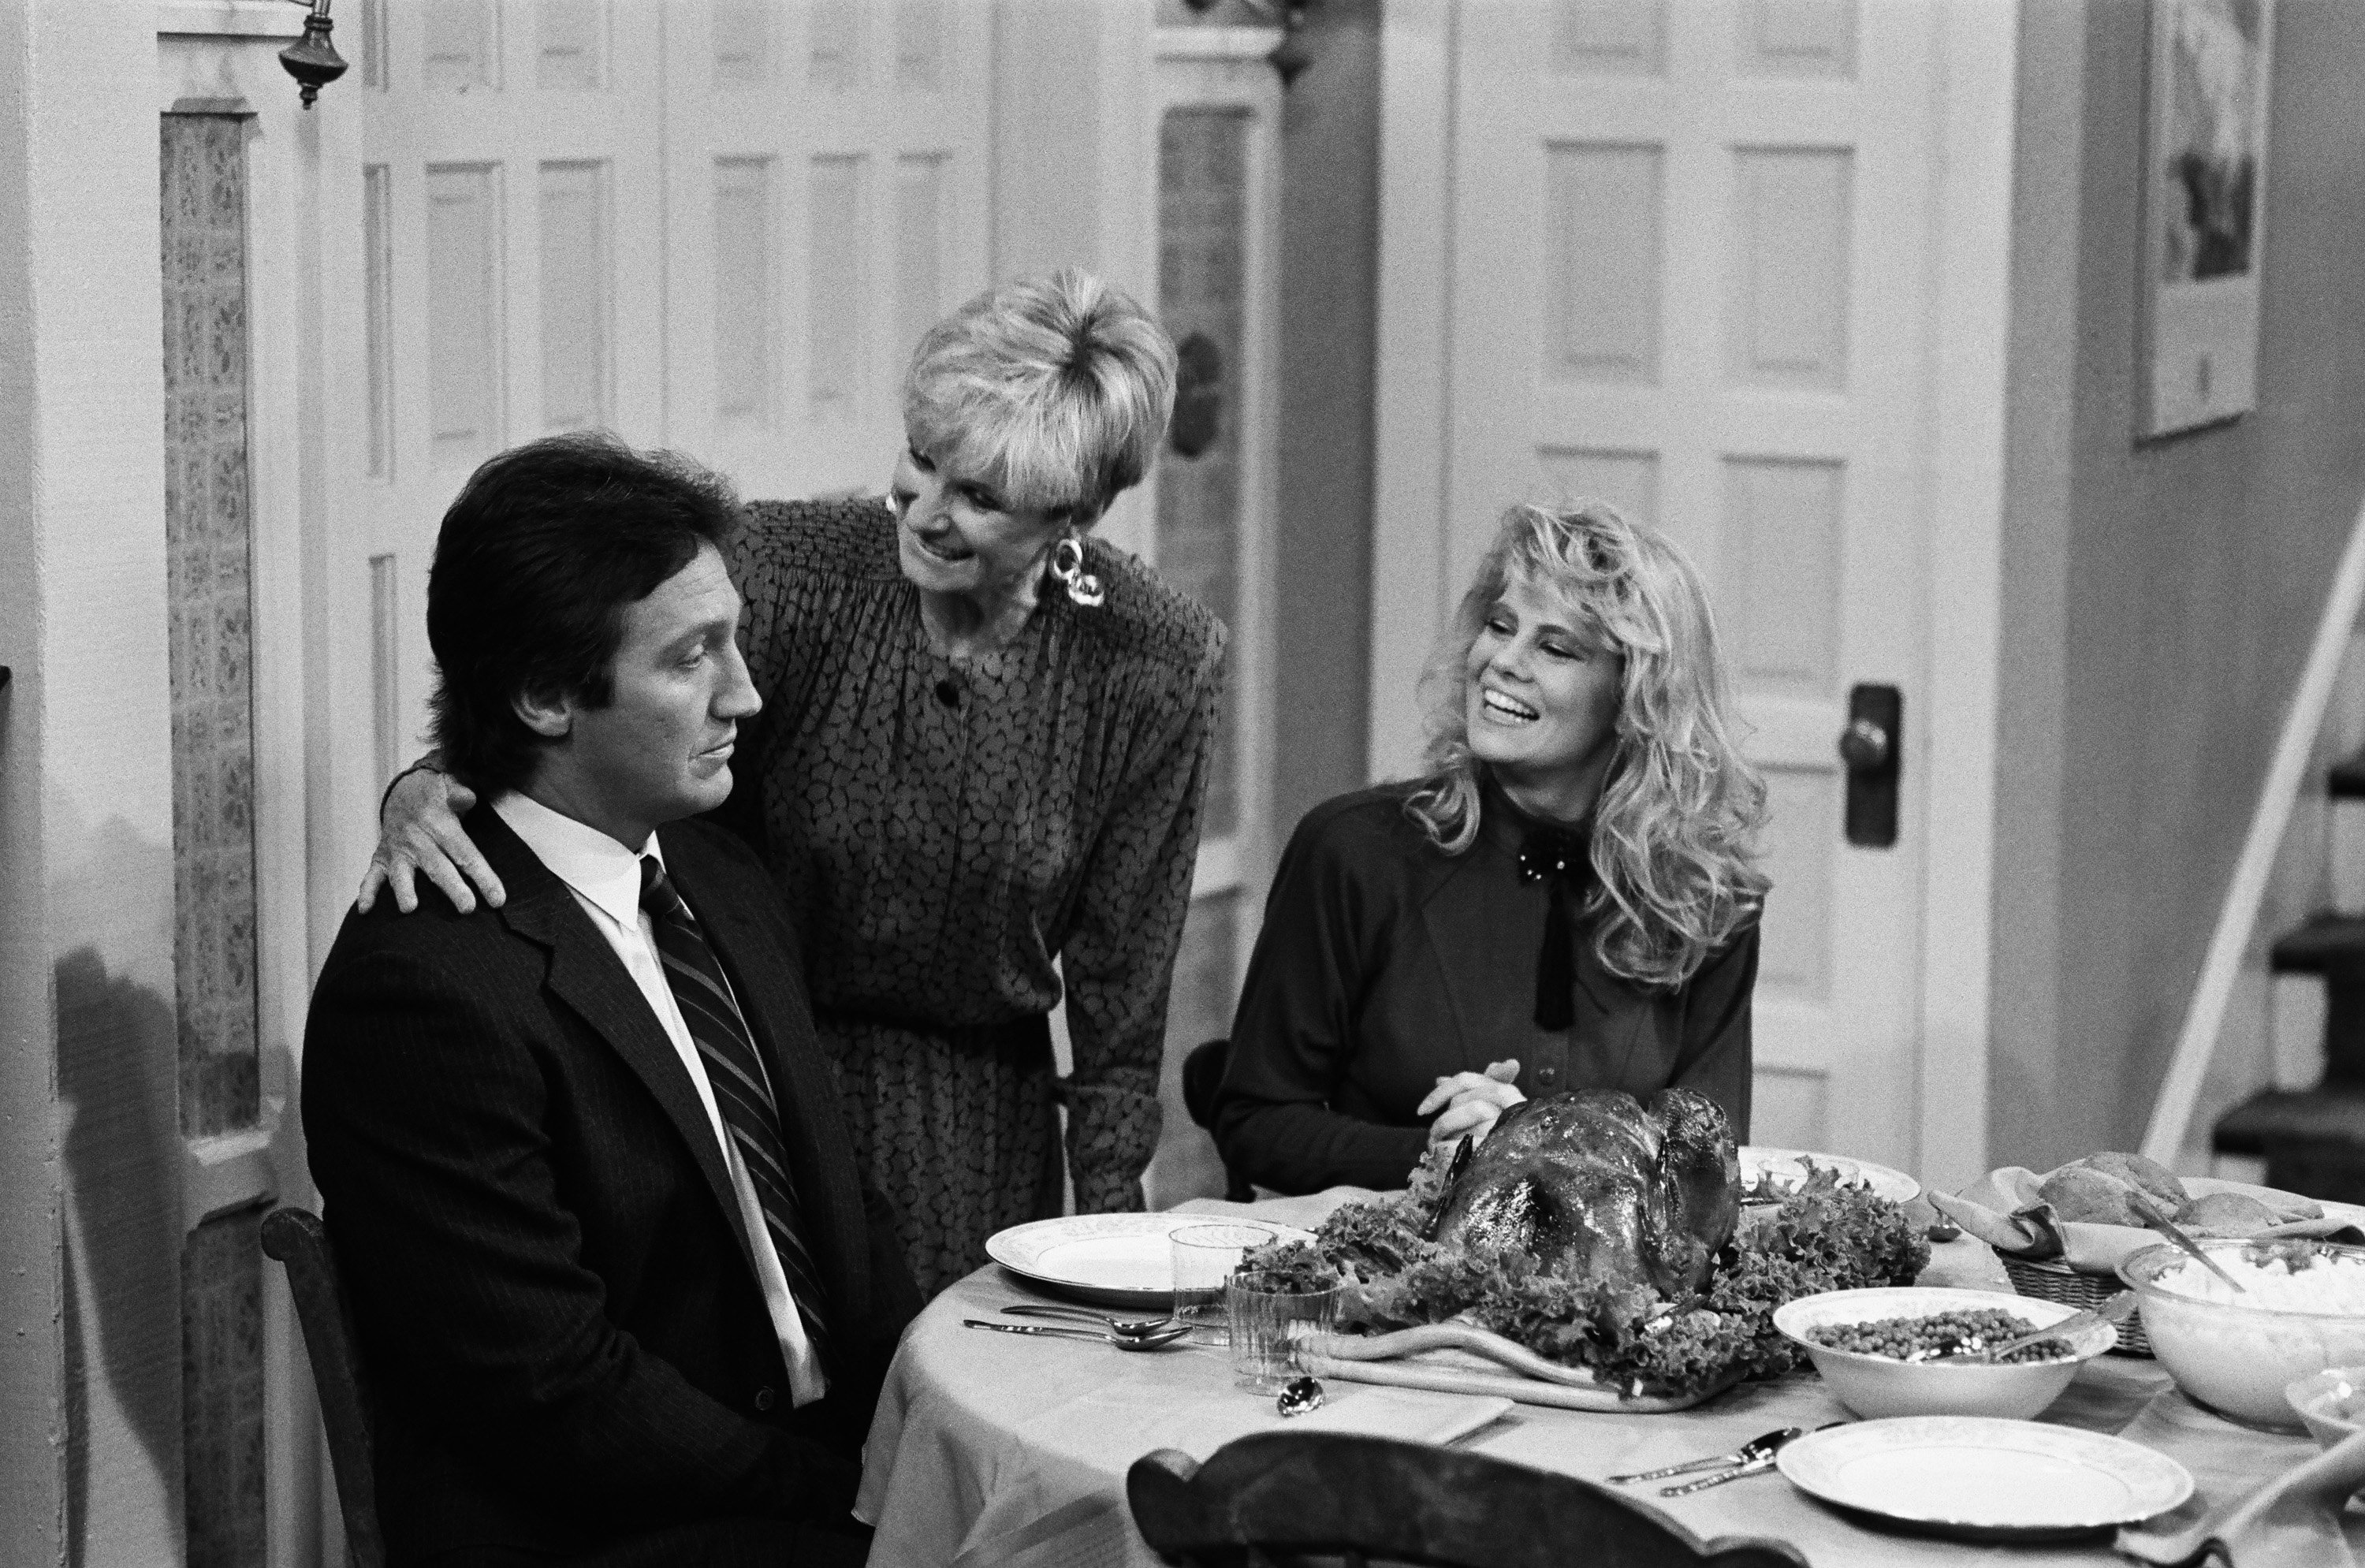 A scene from Episode 14 (Peekskill Law) of "The Facts of Life" featuring Alan Autry, Cloris Leachman, and Lisa Whelchel on November 24, 1987 | Source: Getty Images